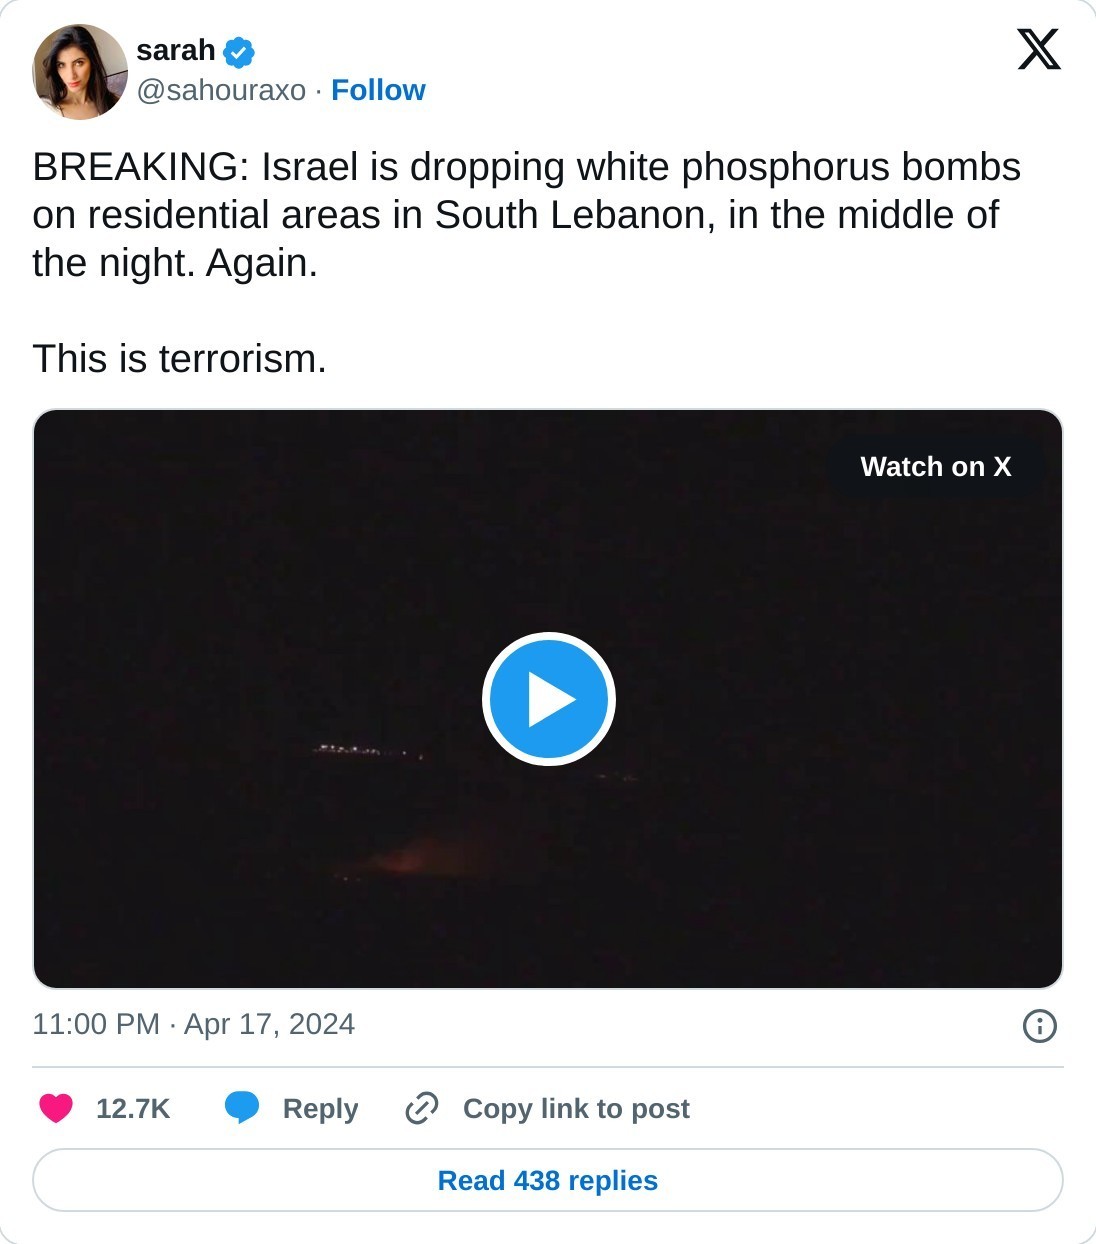 BREAKING: Israel is dropping white phosphorus bombs on residential areas in South Lebanon, in the middle of the night. Again.  This is terrorism. pic.twitter.com/CoIx5DHBrY  — sarah (@sahouraxo) April 17, 2024